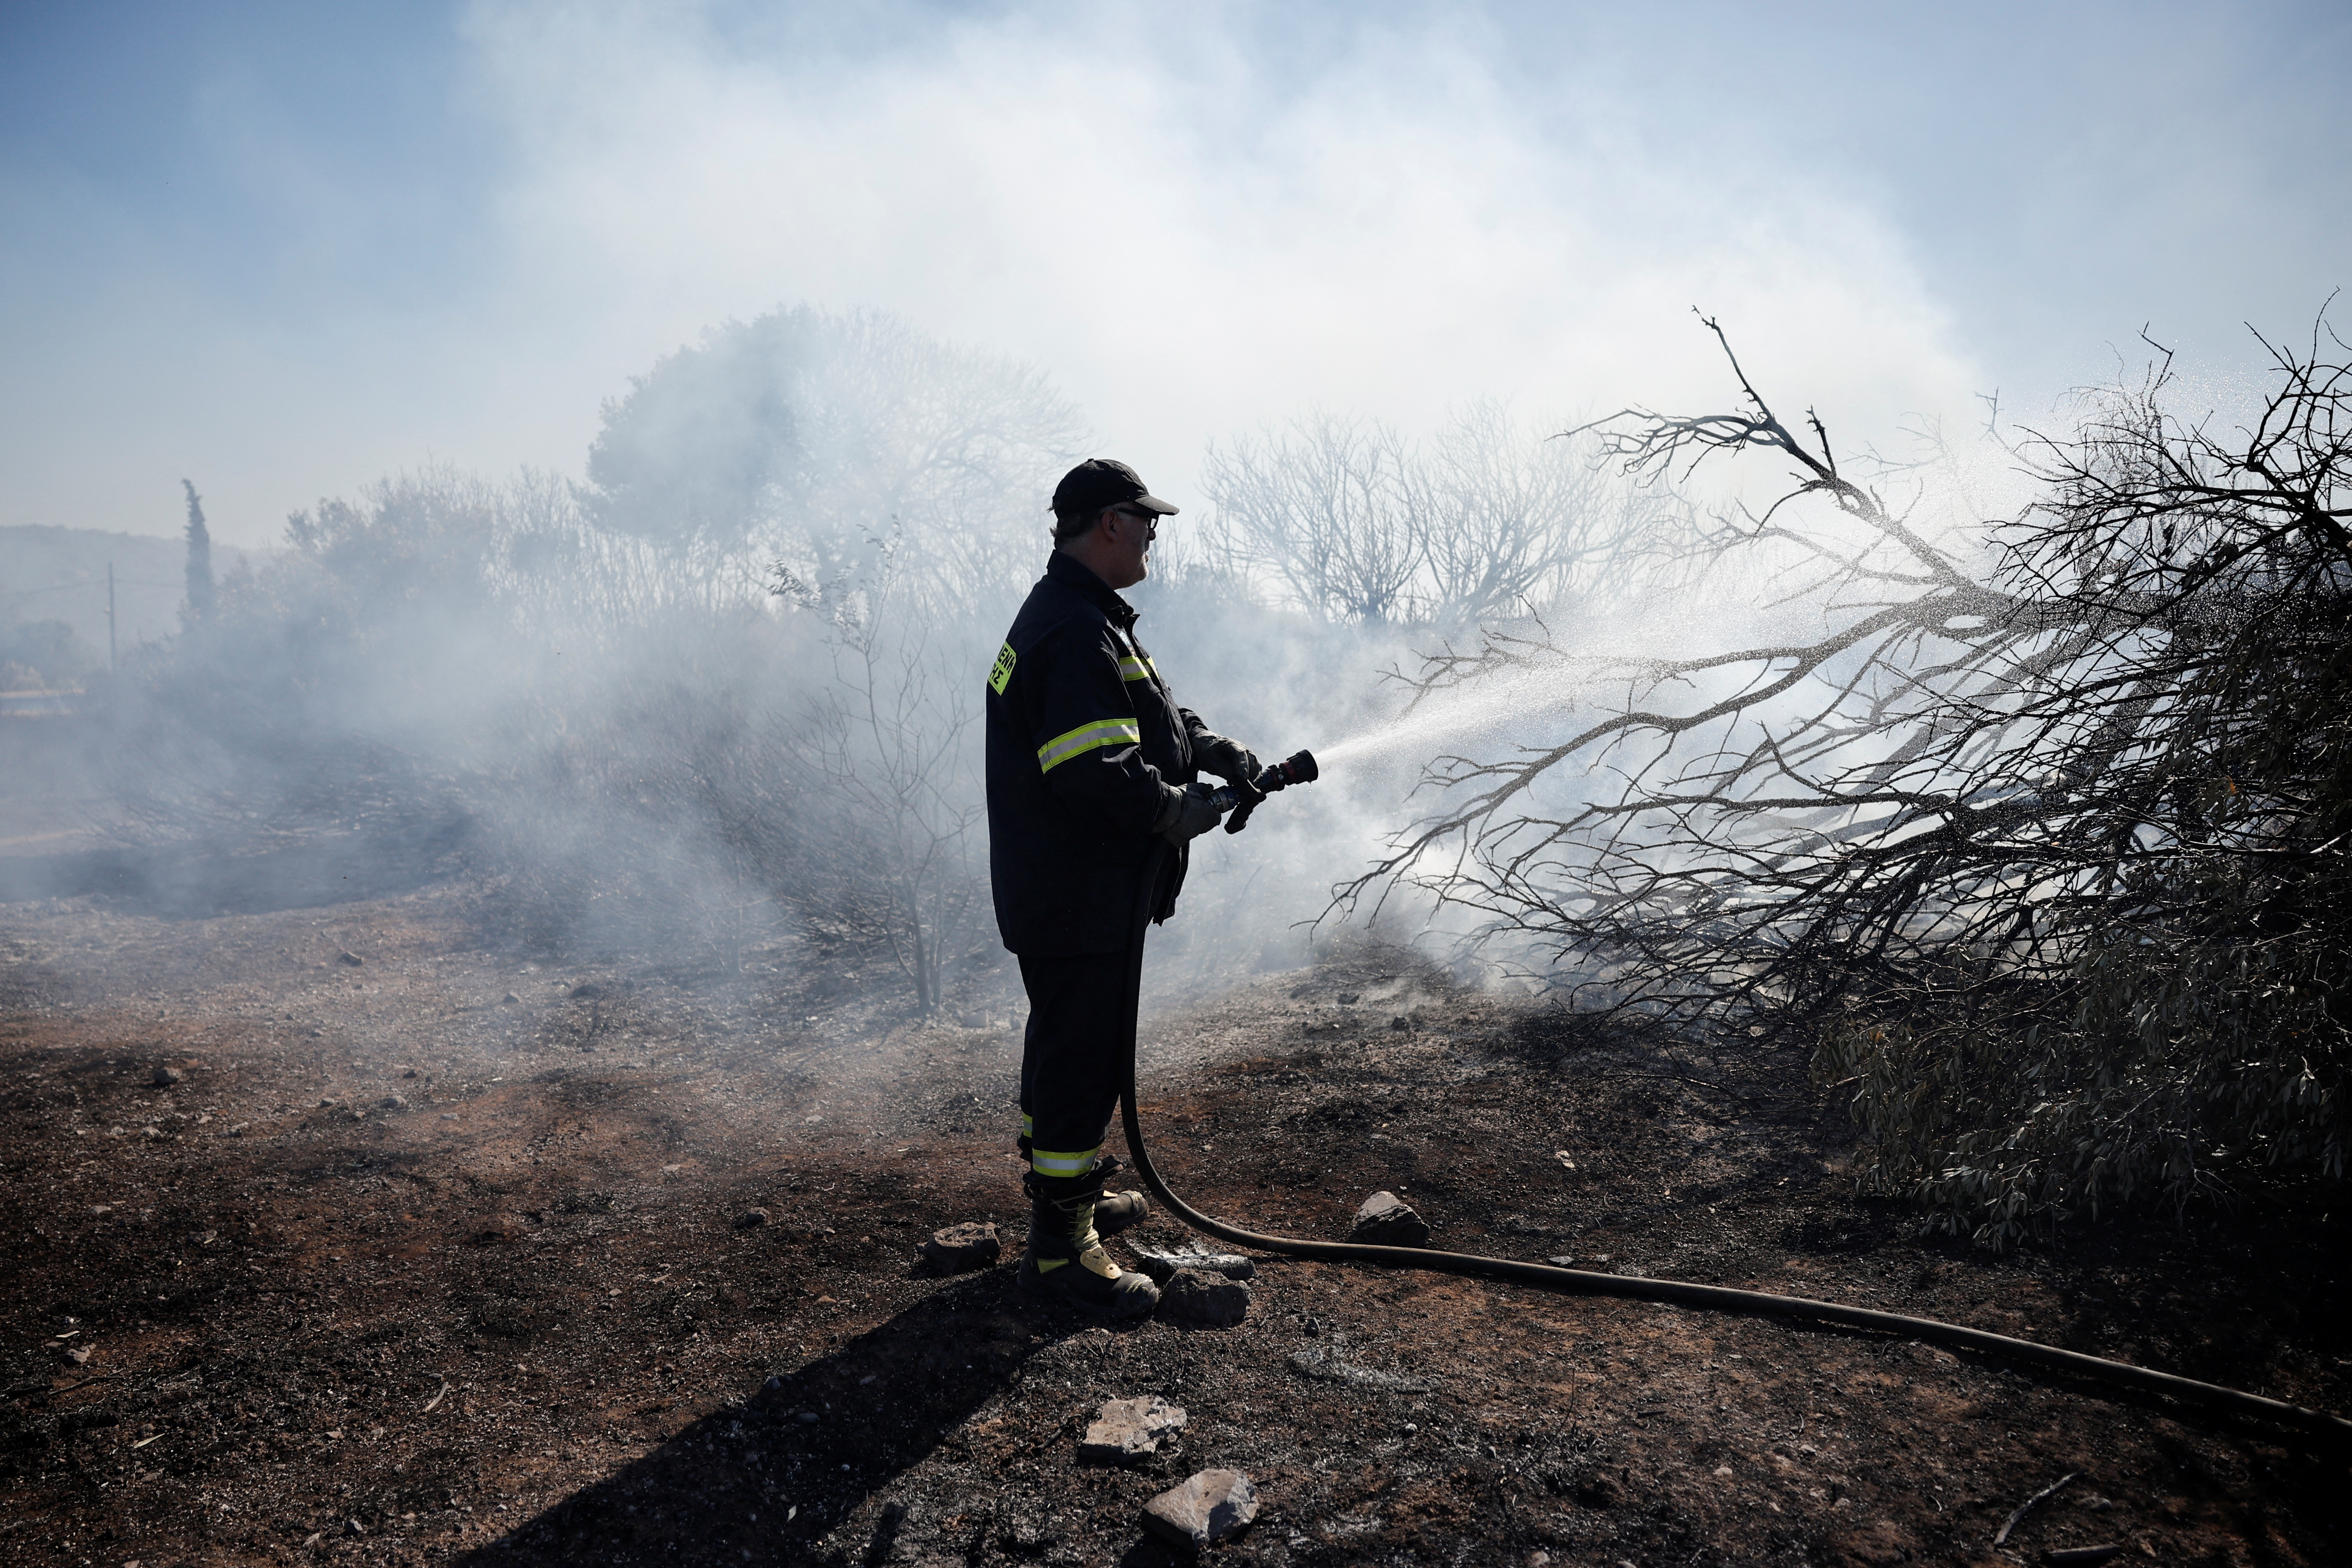 Greek firefighters battle new wildfire near Athens amid strong winds